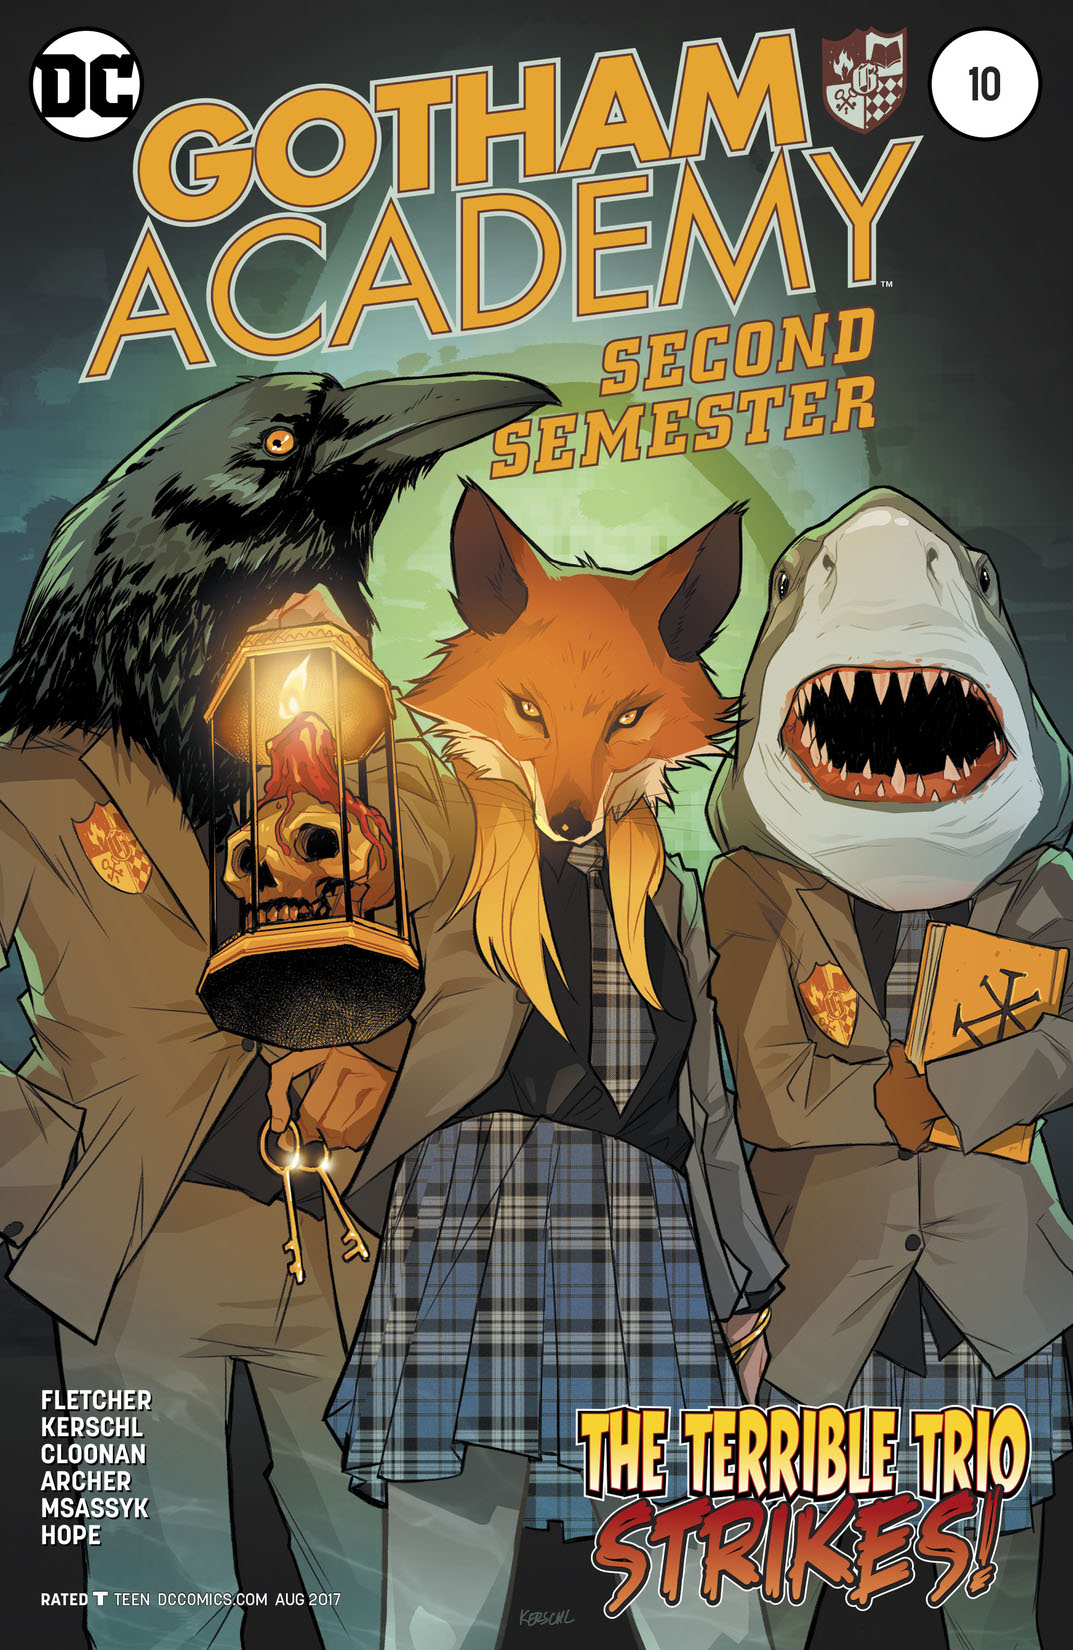 Gotham Academy: Second Semester #10 preview images